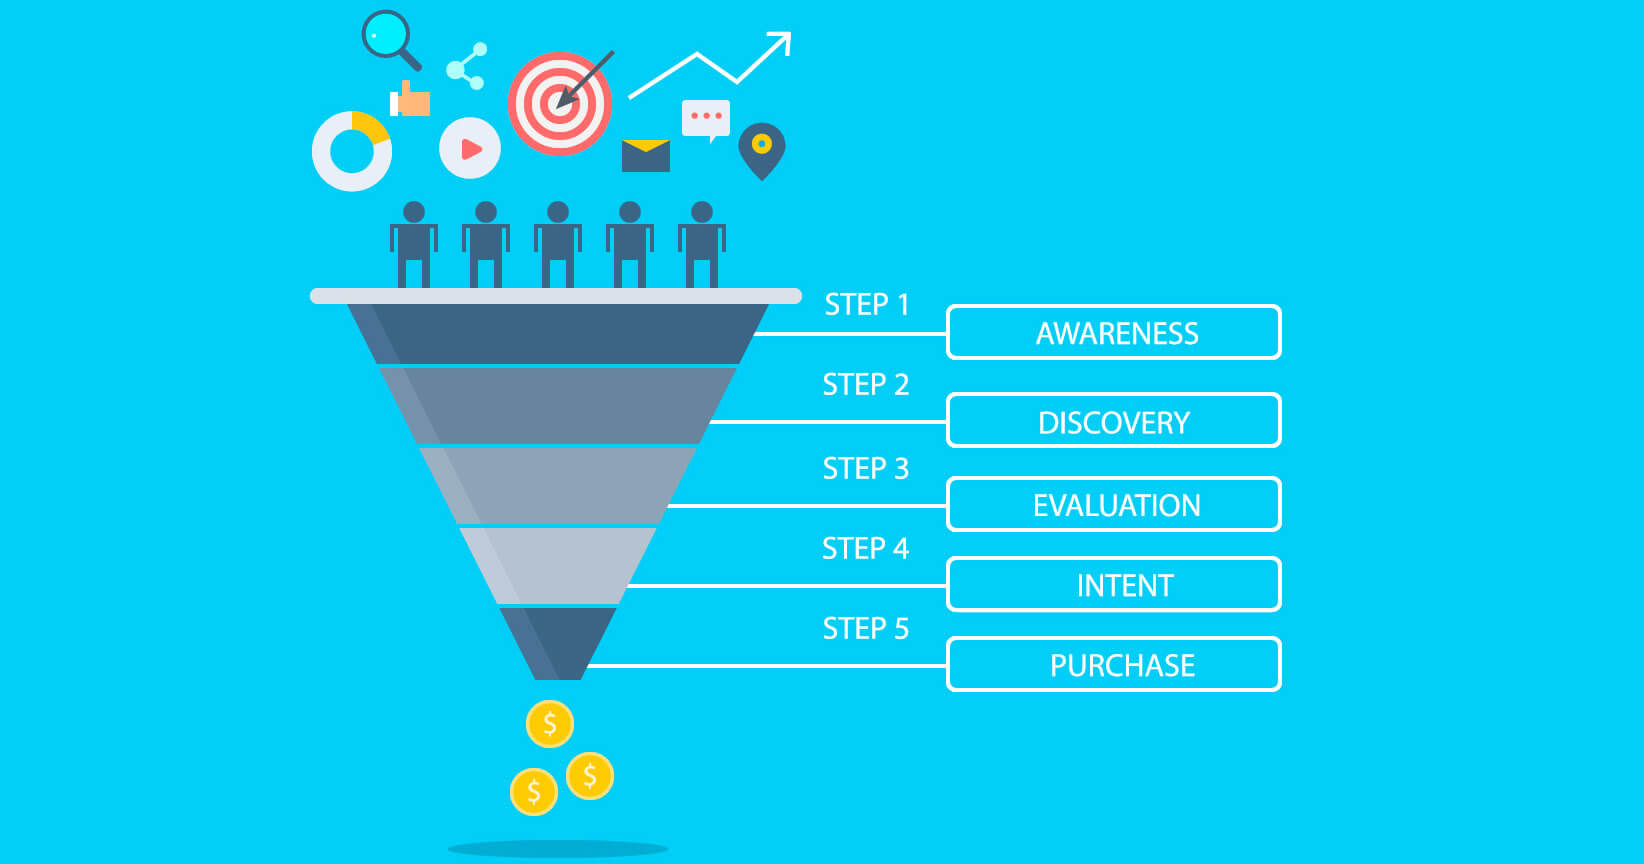 Elements of a conversion funnel